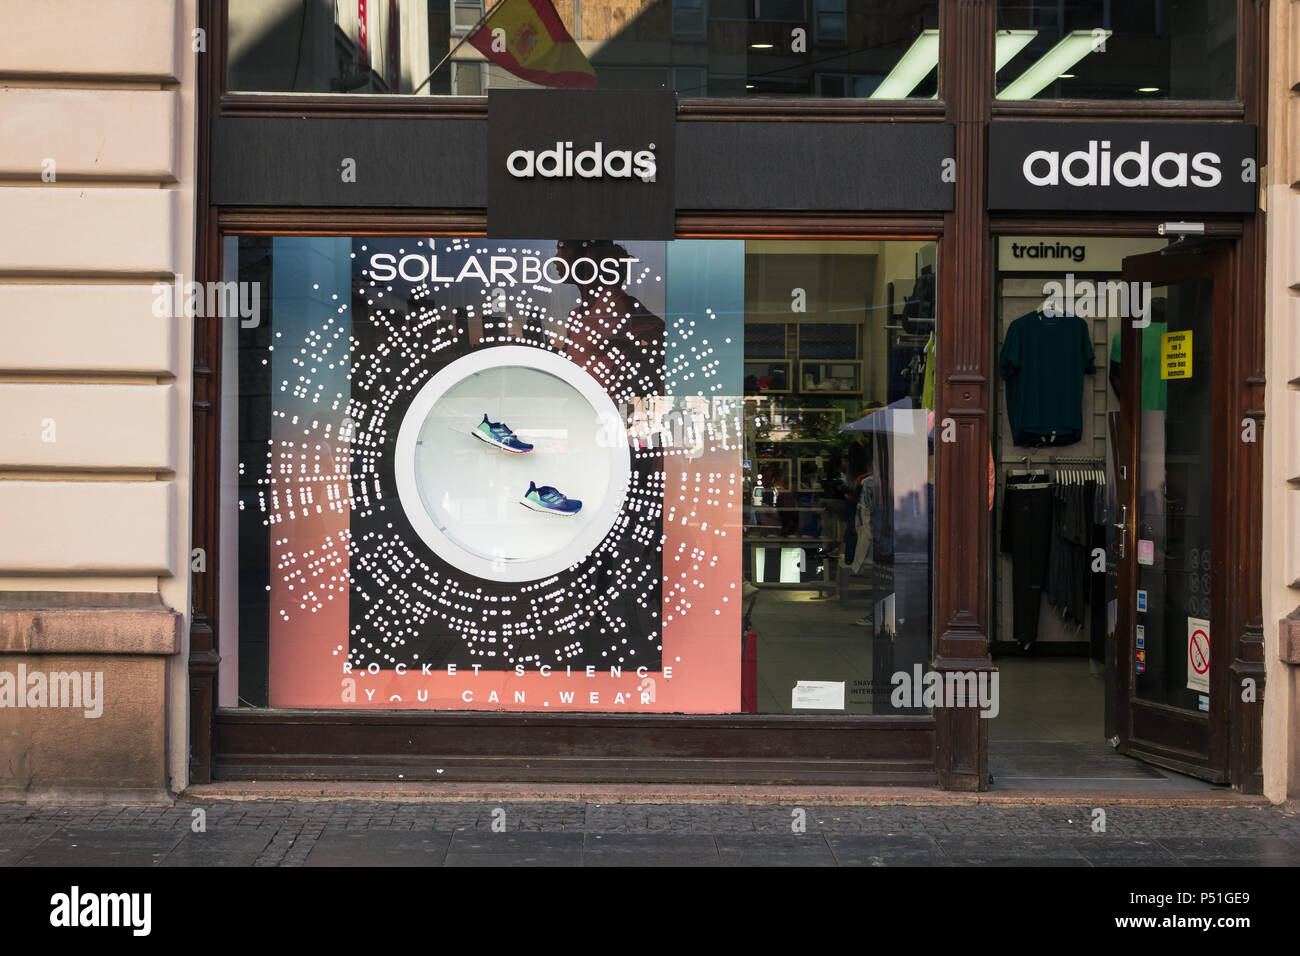 Adidas Shop High Resolution Stock Photography and Images - Alamy